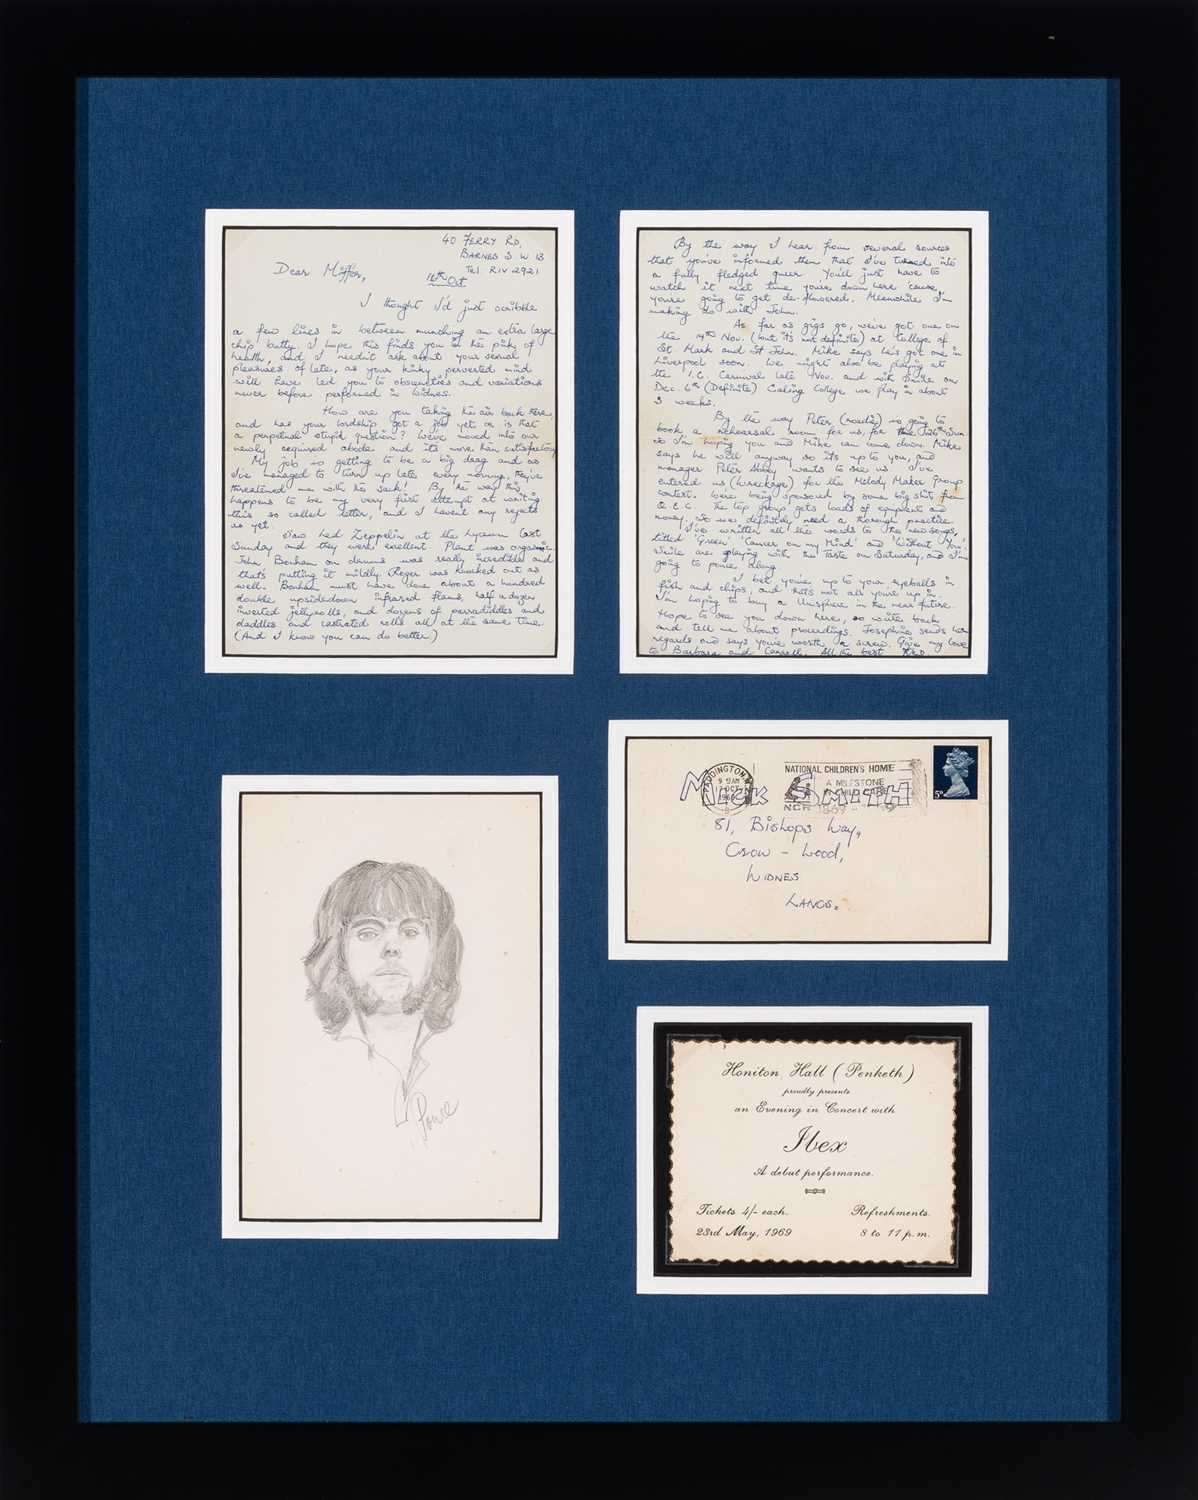 Lot 5042 - An important 1969 letter and drawing from Freddie Mercury to Ibex bandmate Mick "Miffer" Smith